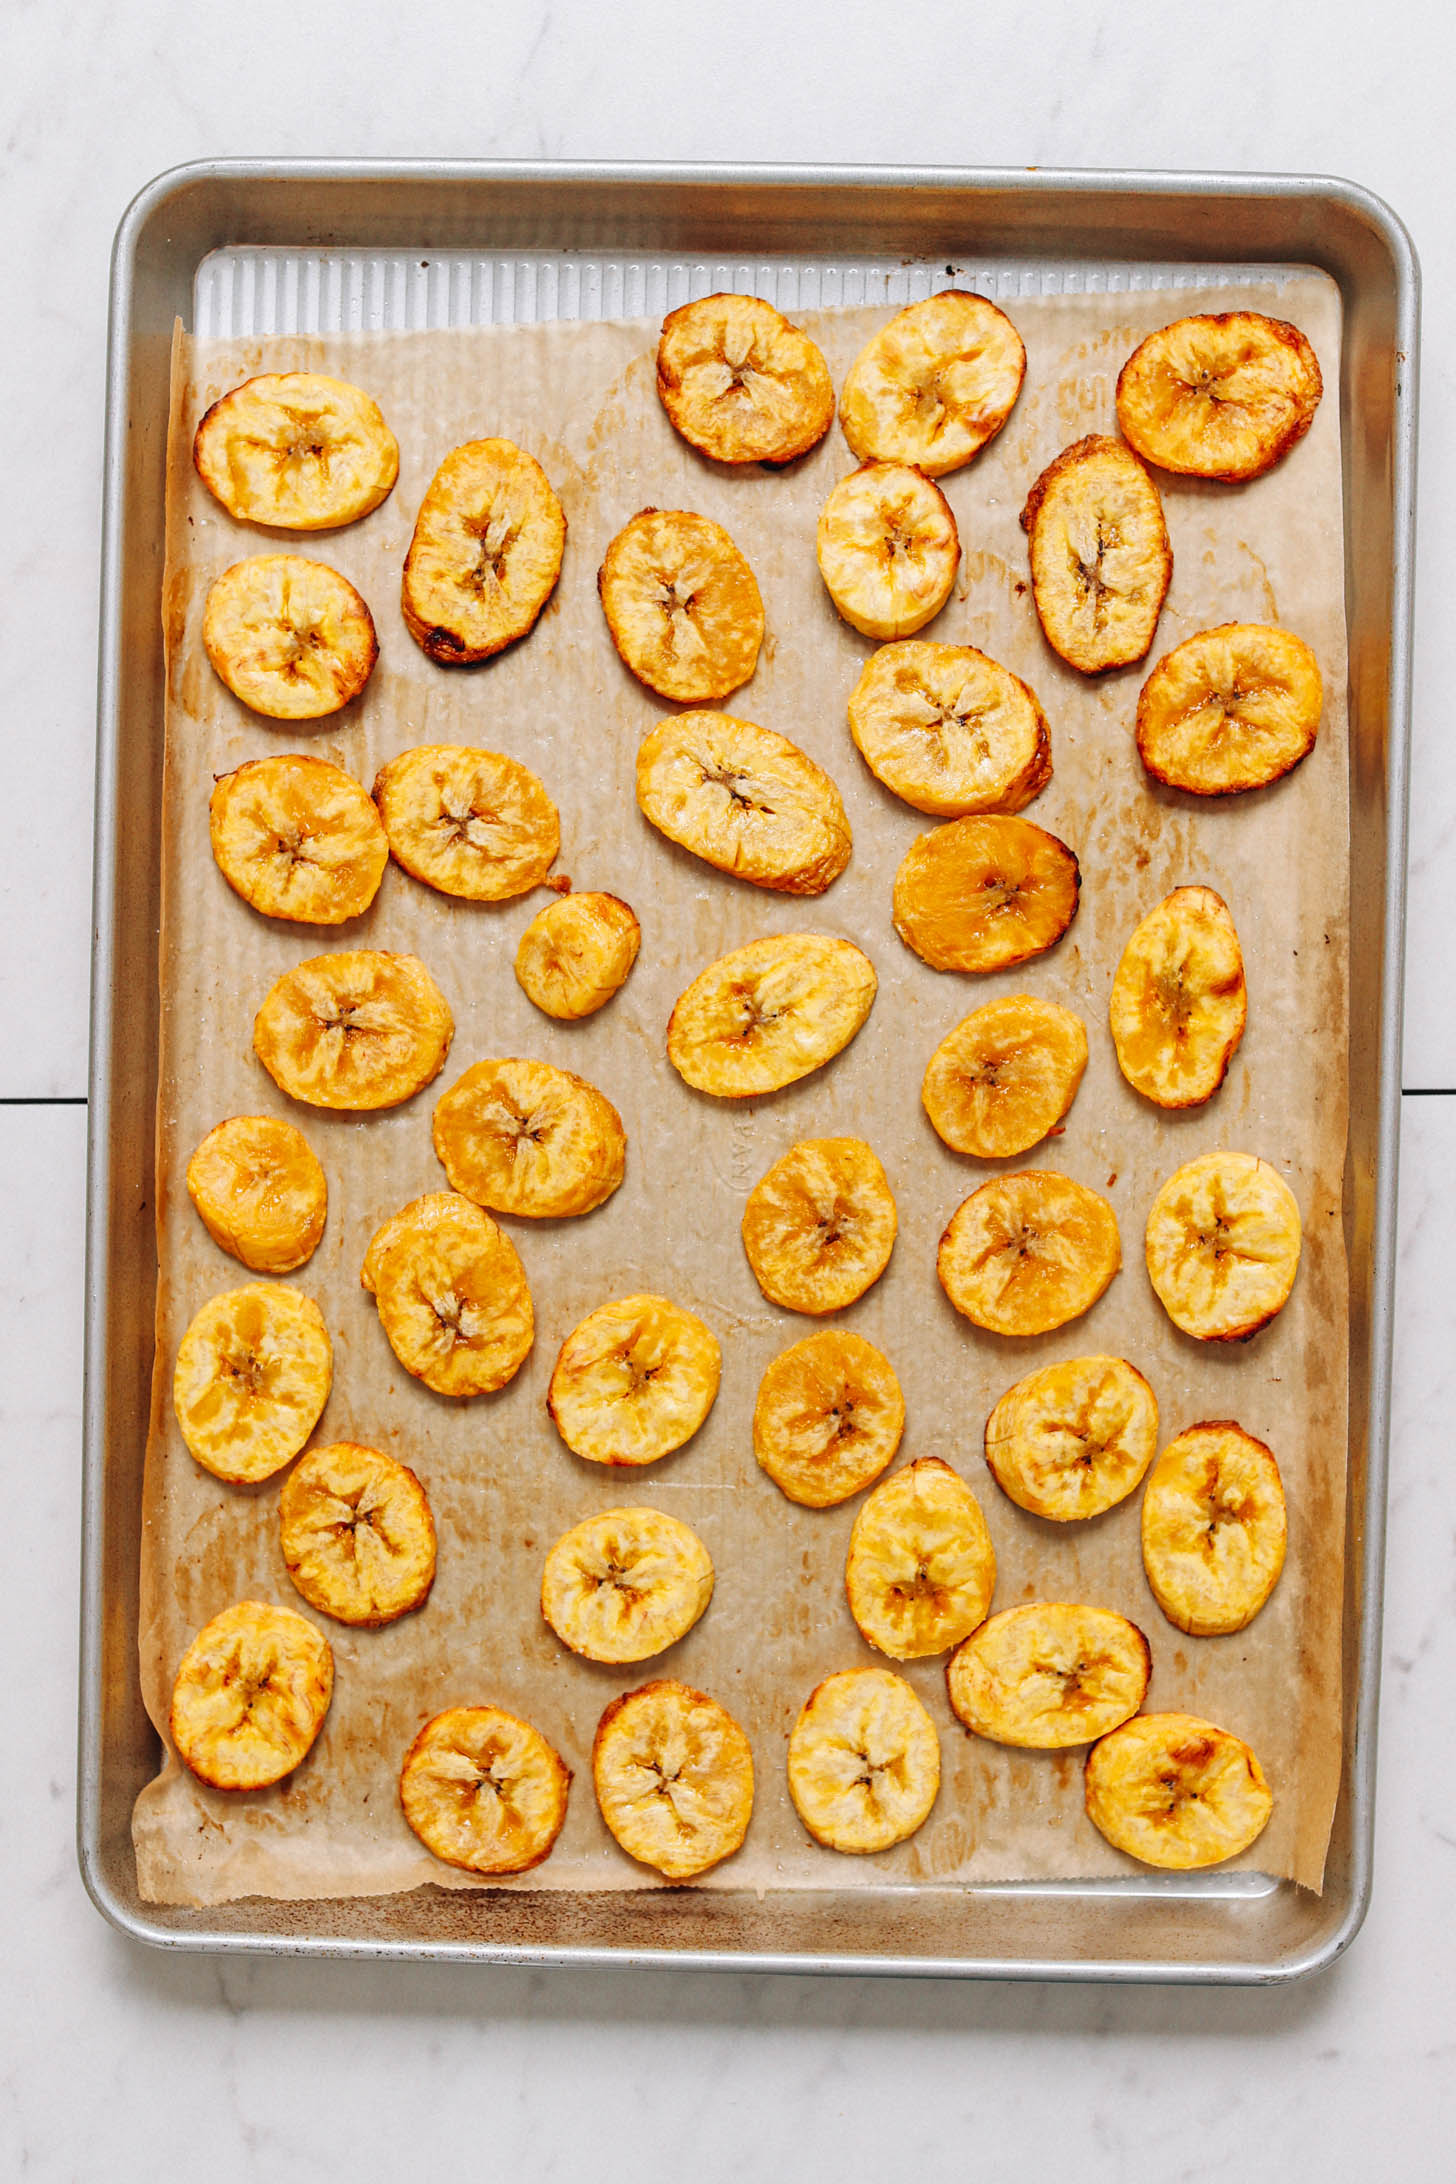 Roasted plantains on a baking sheet